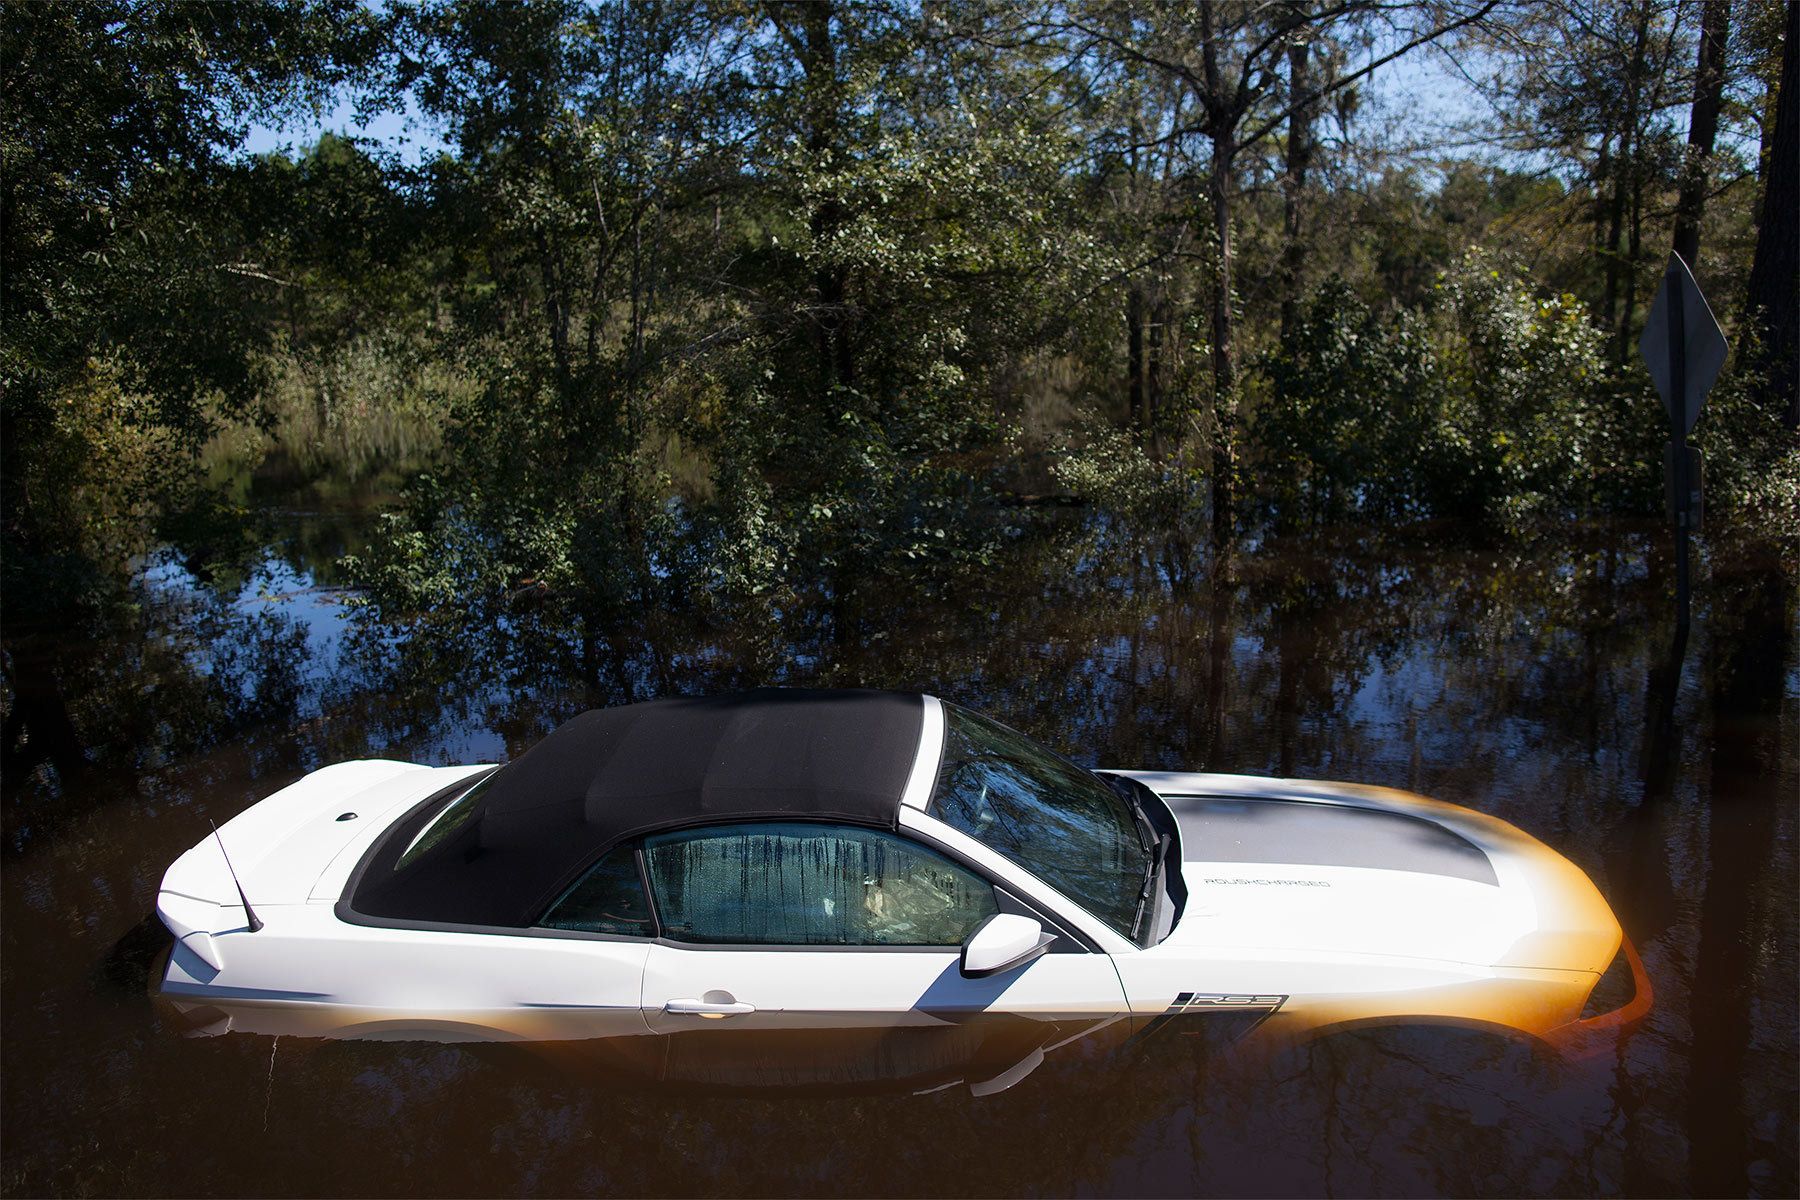 A car that was stranded is submerged in flood waters along Lee's Landing Circle in Conway, South Carolina October 7, 2015. Rescuers searched early Wednesday for two people missing in floodwaters in South Carolina, while authorities urged residents in hundreds of homes to seek higher ground. REUTERS/Randall Hill